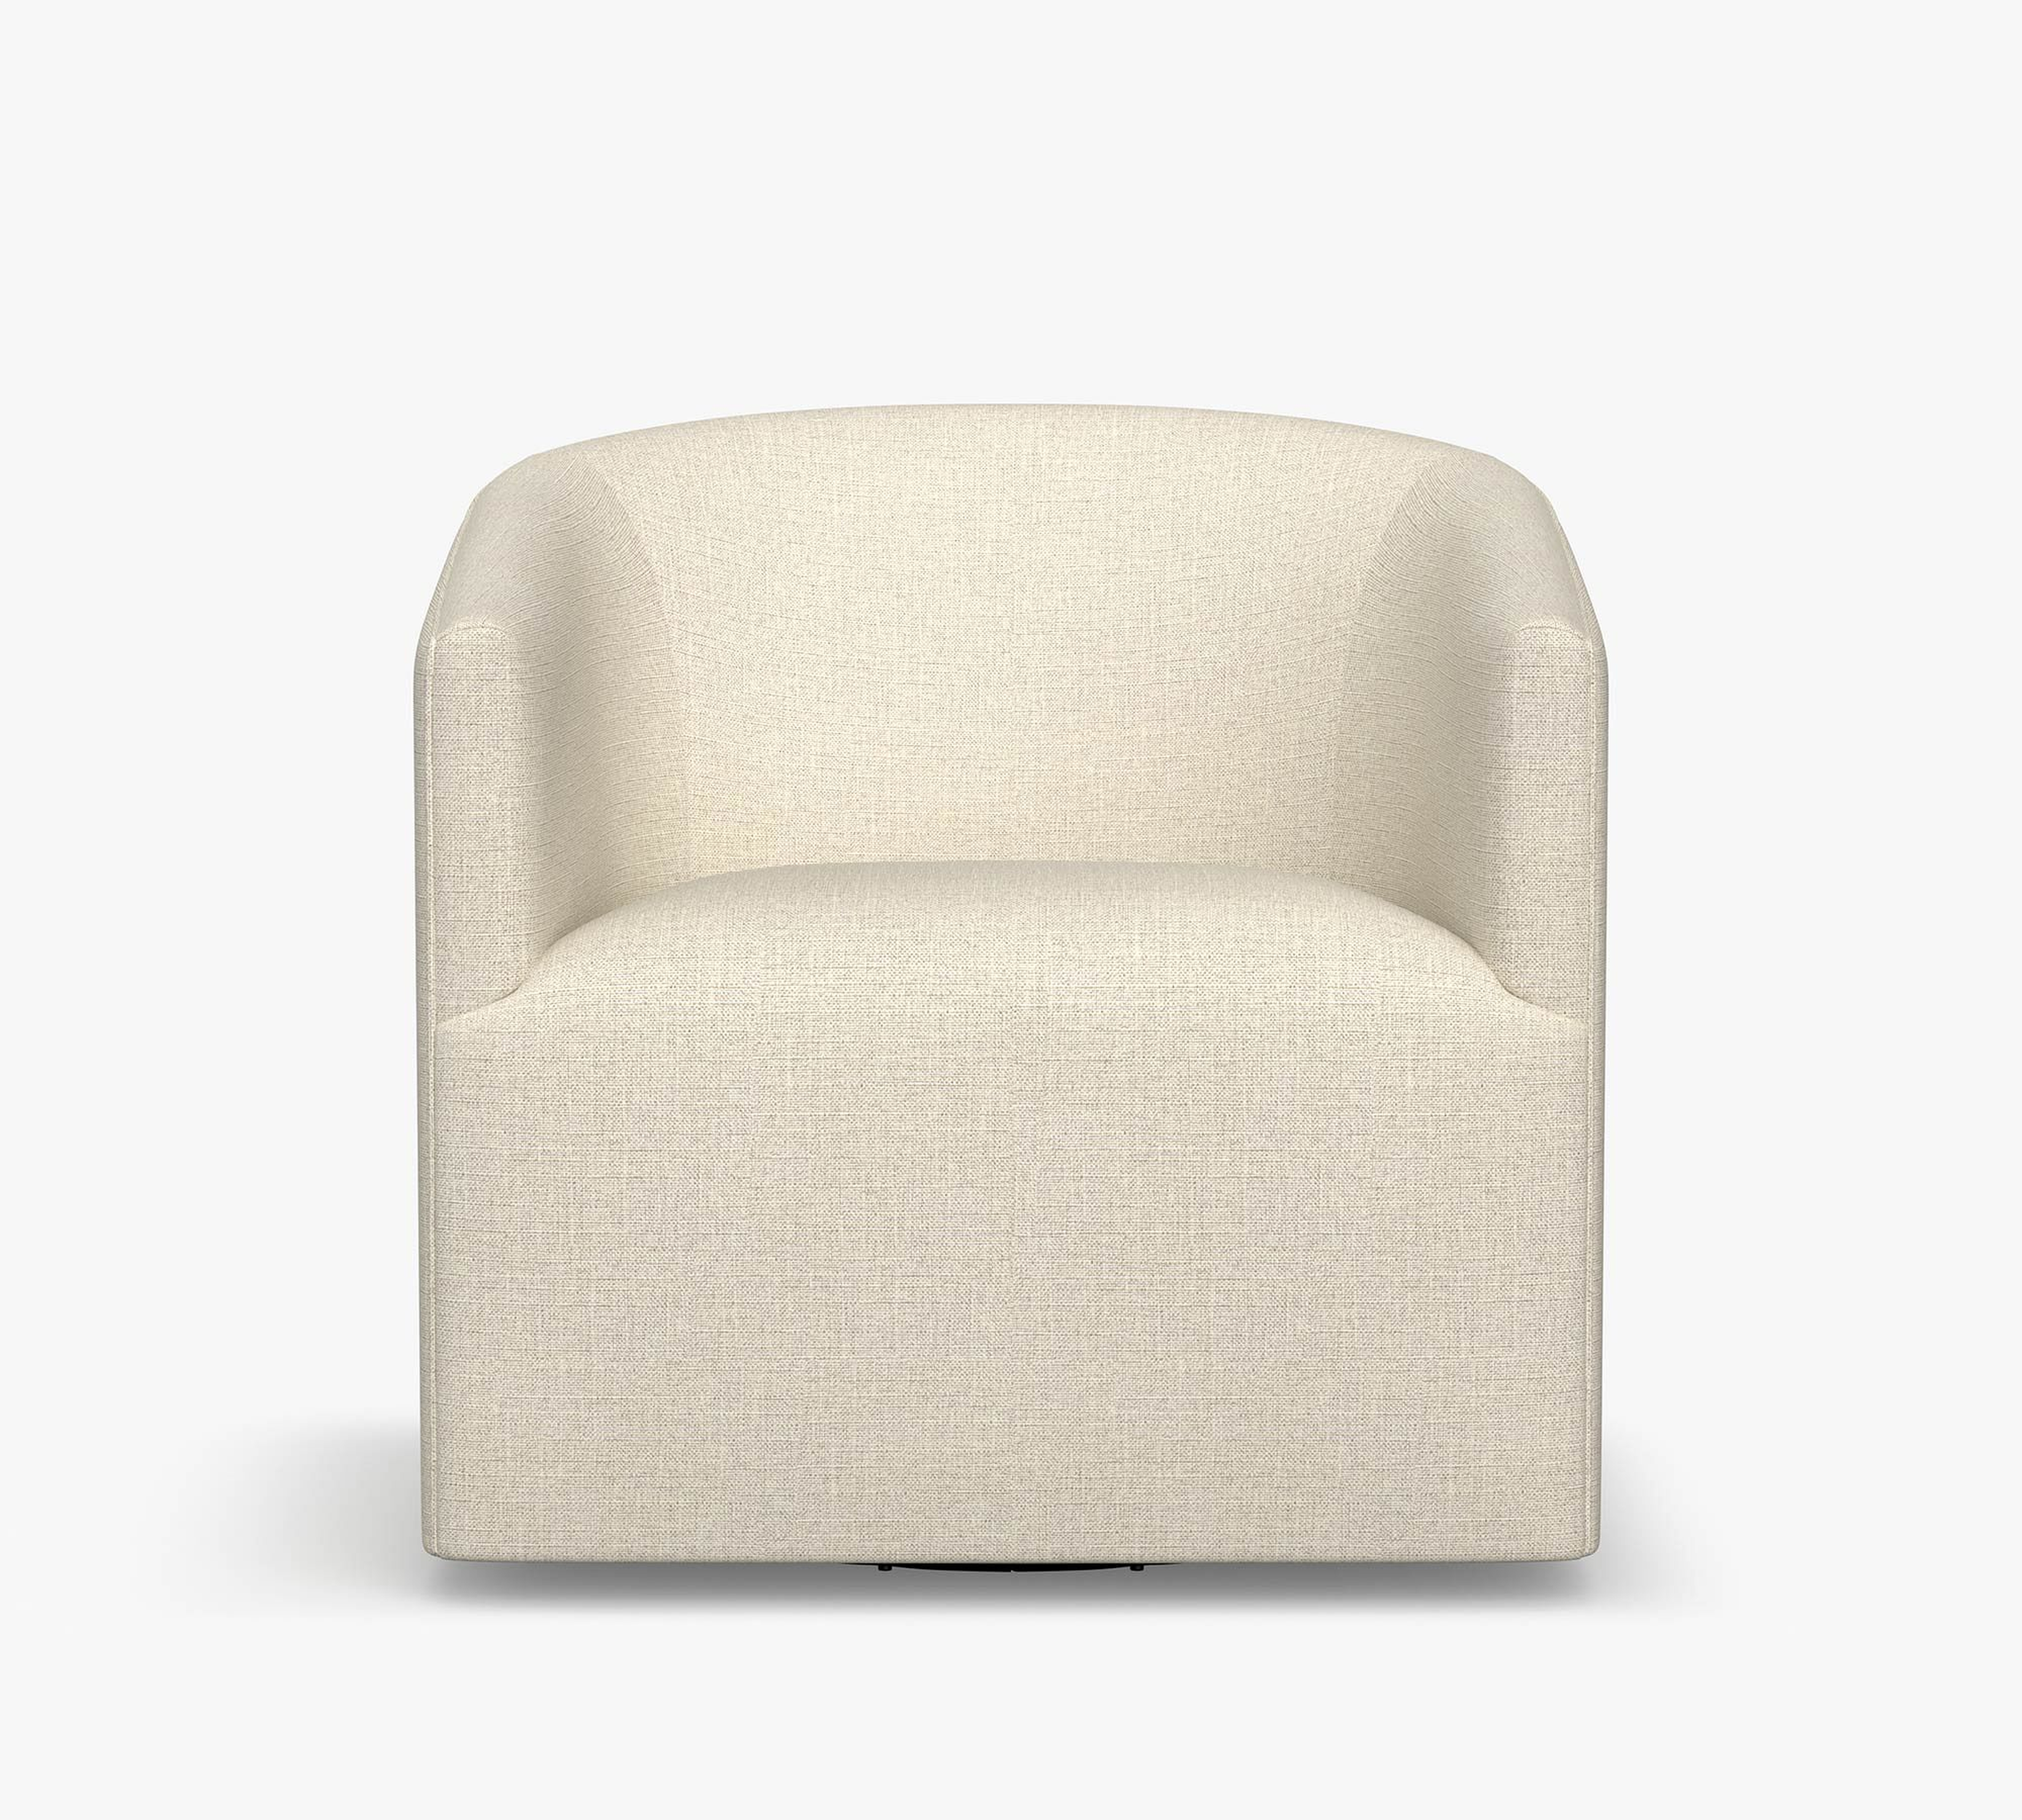 Baldwin Upholstered Swivel Armchair, Polyester Wrapped Cushions, Performance Heathered Basketweave Alabaster White - Pottery Barn